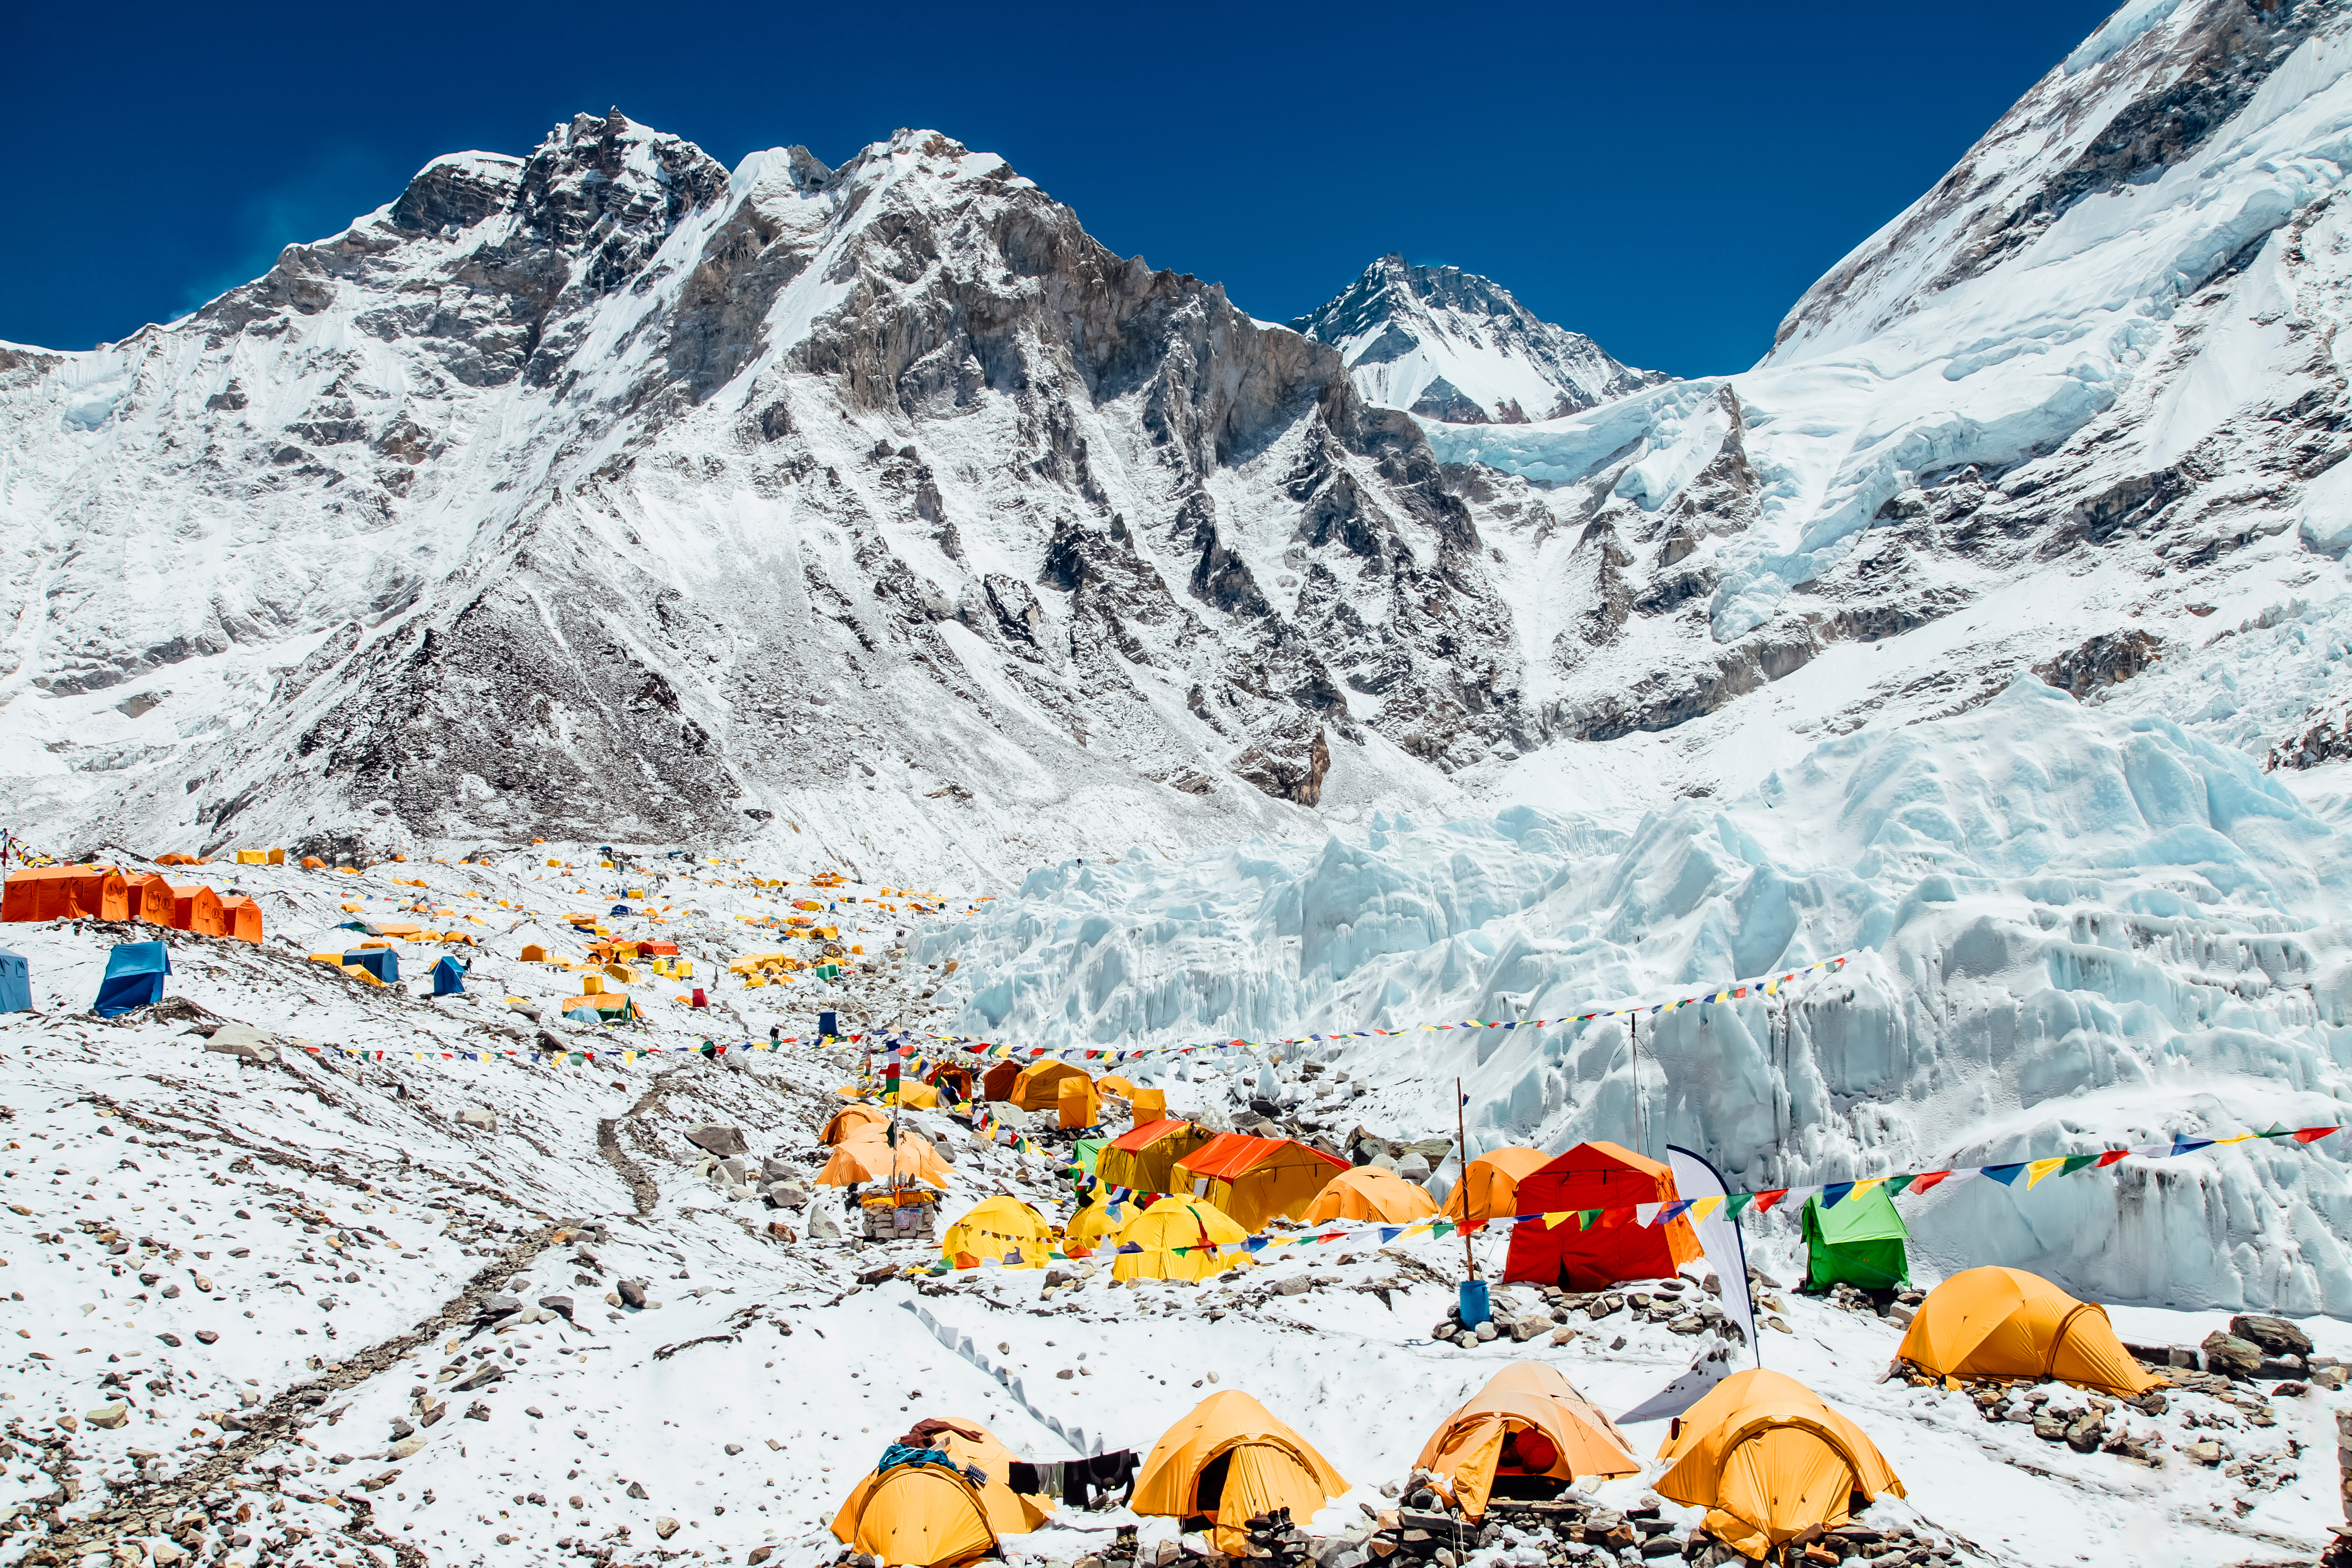 The NeverRest Project Research: This is the energy consumption at the Everest Base Camp